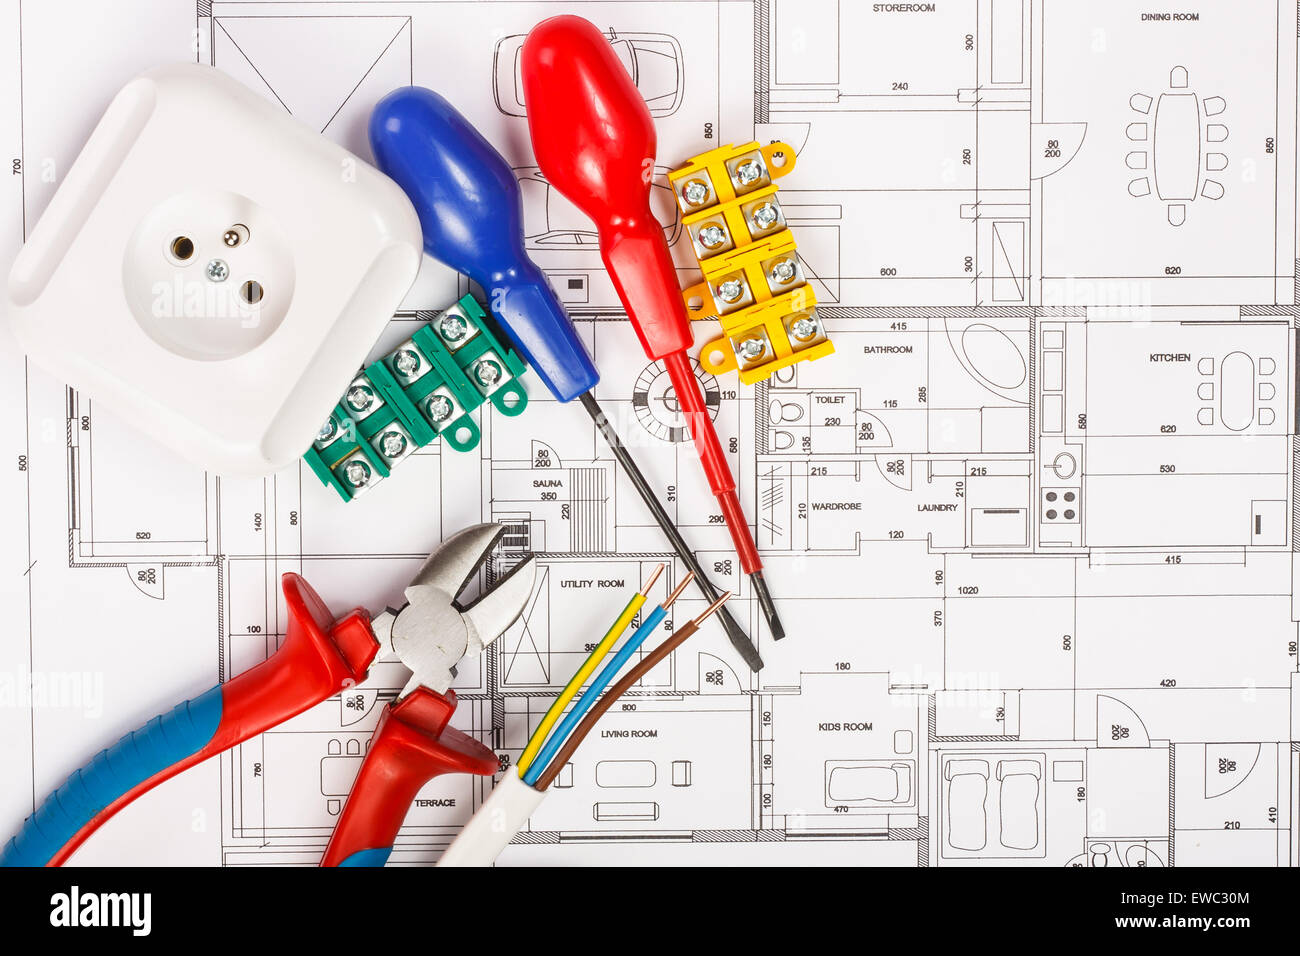 Electrical equipment and tools on house plans Stock Photo